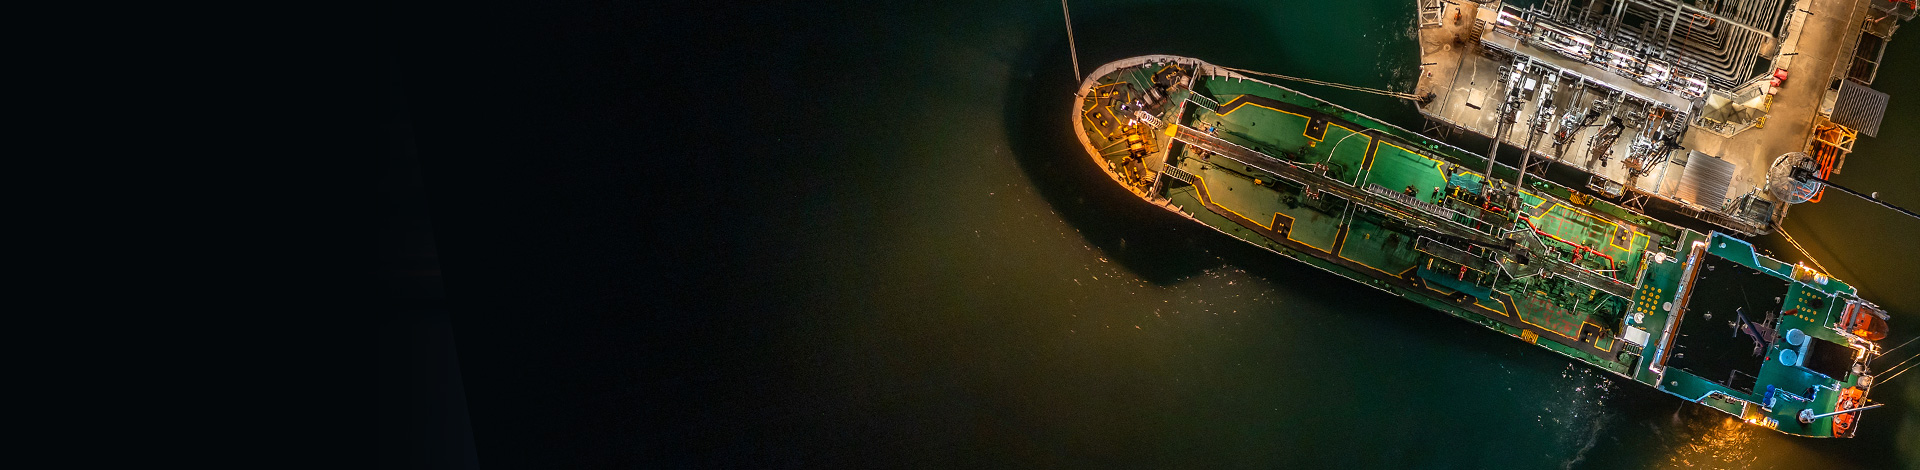 Aerial view of a large vessel docked at night with illuminated areas highlighting intricate details of the deck and equipment.